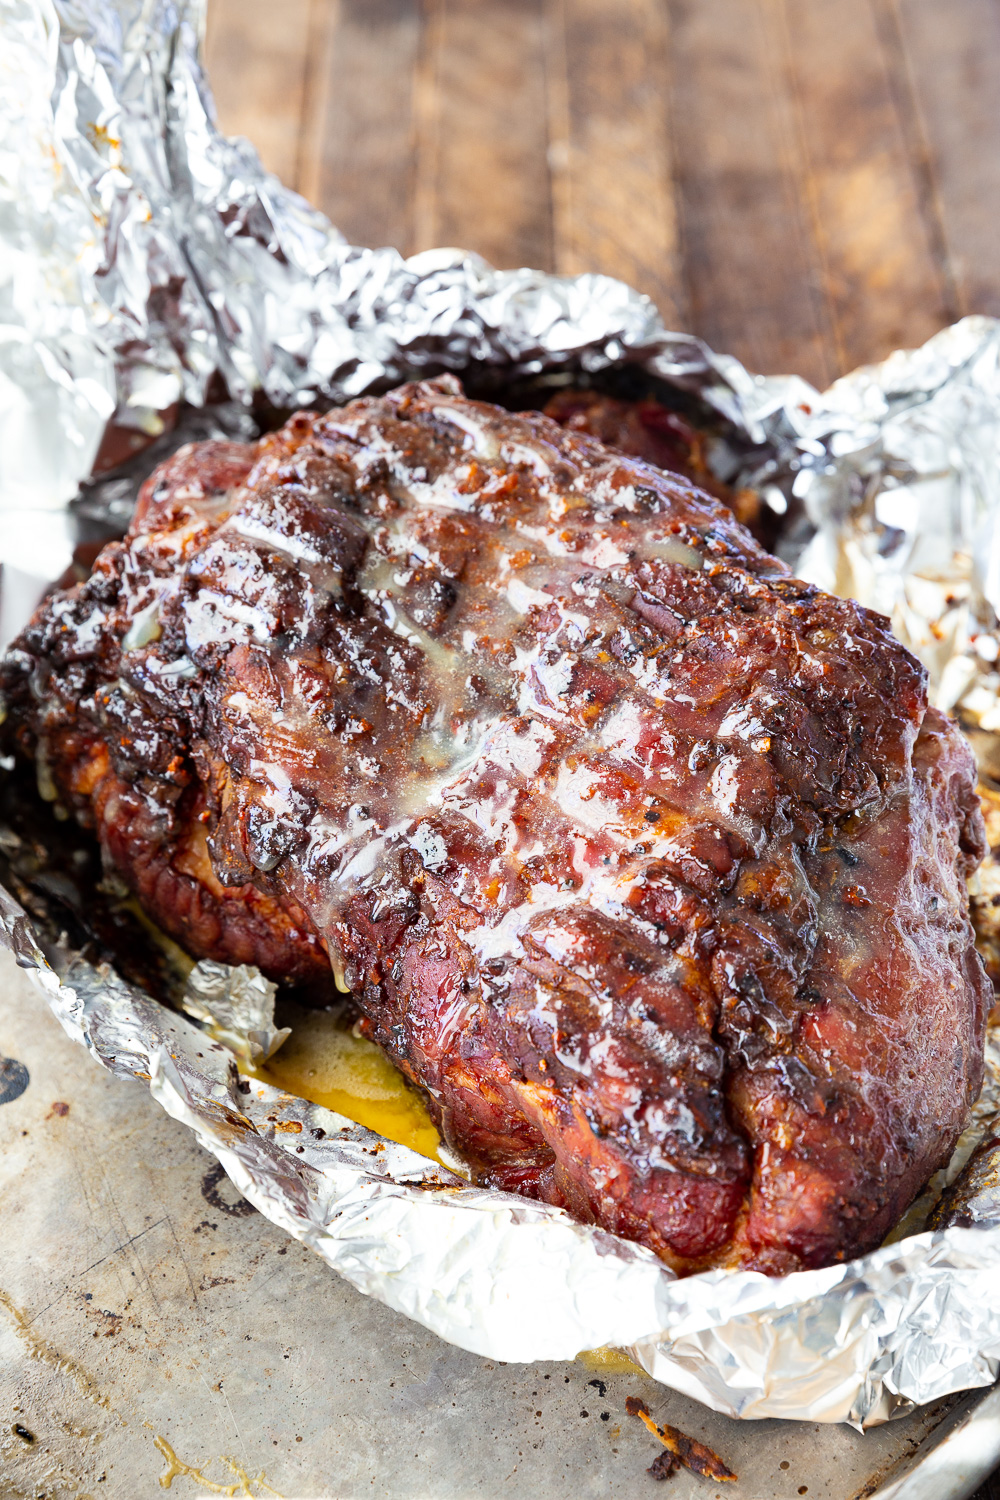 A cajun style pork roast, cooked on a pellet smoker. So good you don't need sauce. 